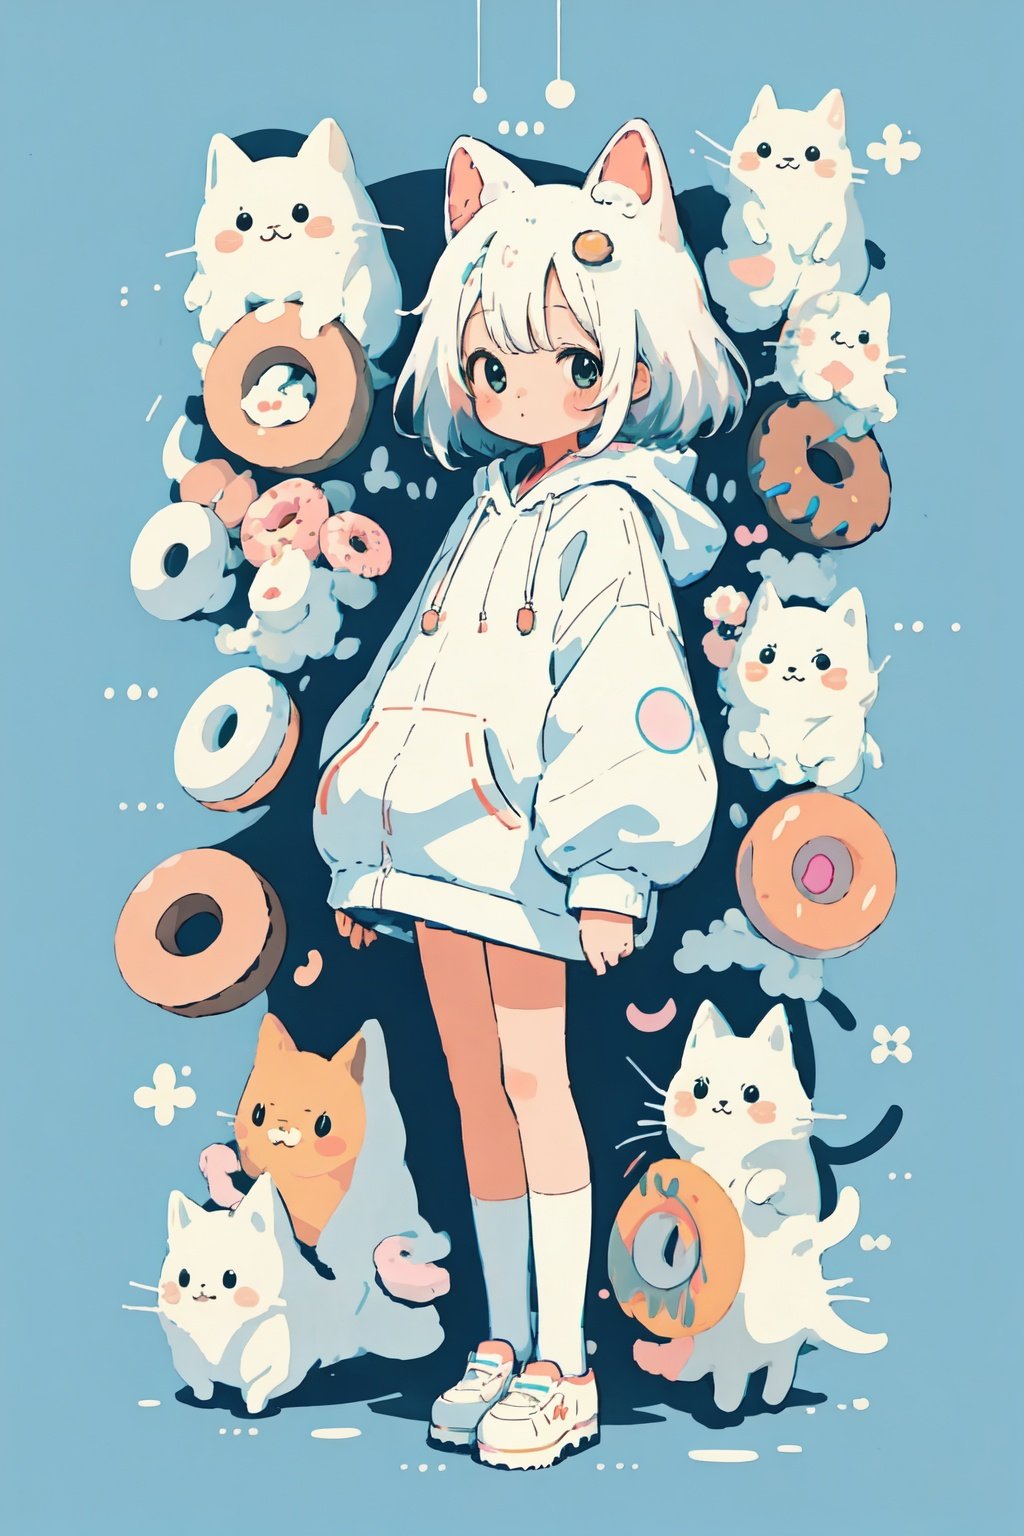 style of Chiho Aoshima, adorable, cute, a girl, white hair, puffy hoody, donuts, many cats, full body, pastel colors, simple white background, in donuts, Illustration, cover art, japan, blur, shiny,minimalistic,simplecats